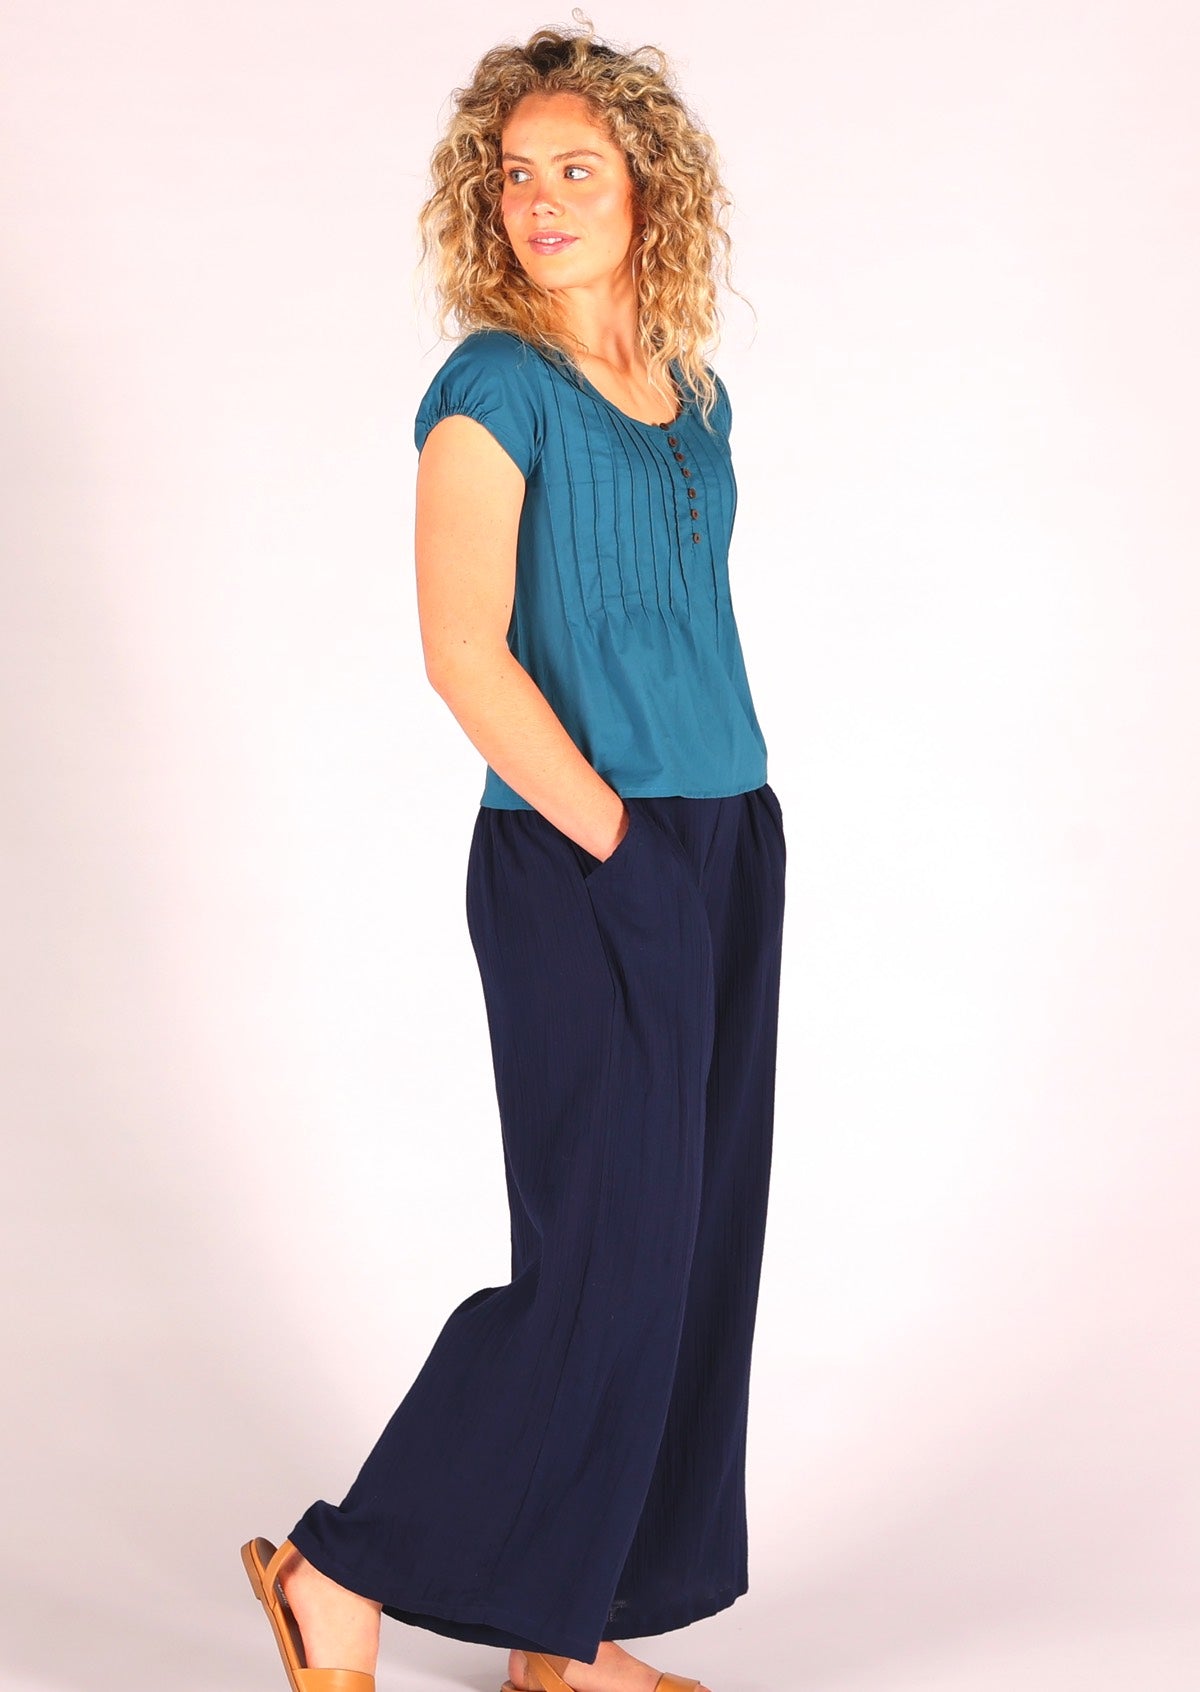 Double cotton wide leg pants with pockets are the most comfortable pants ever!